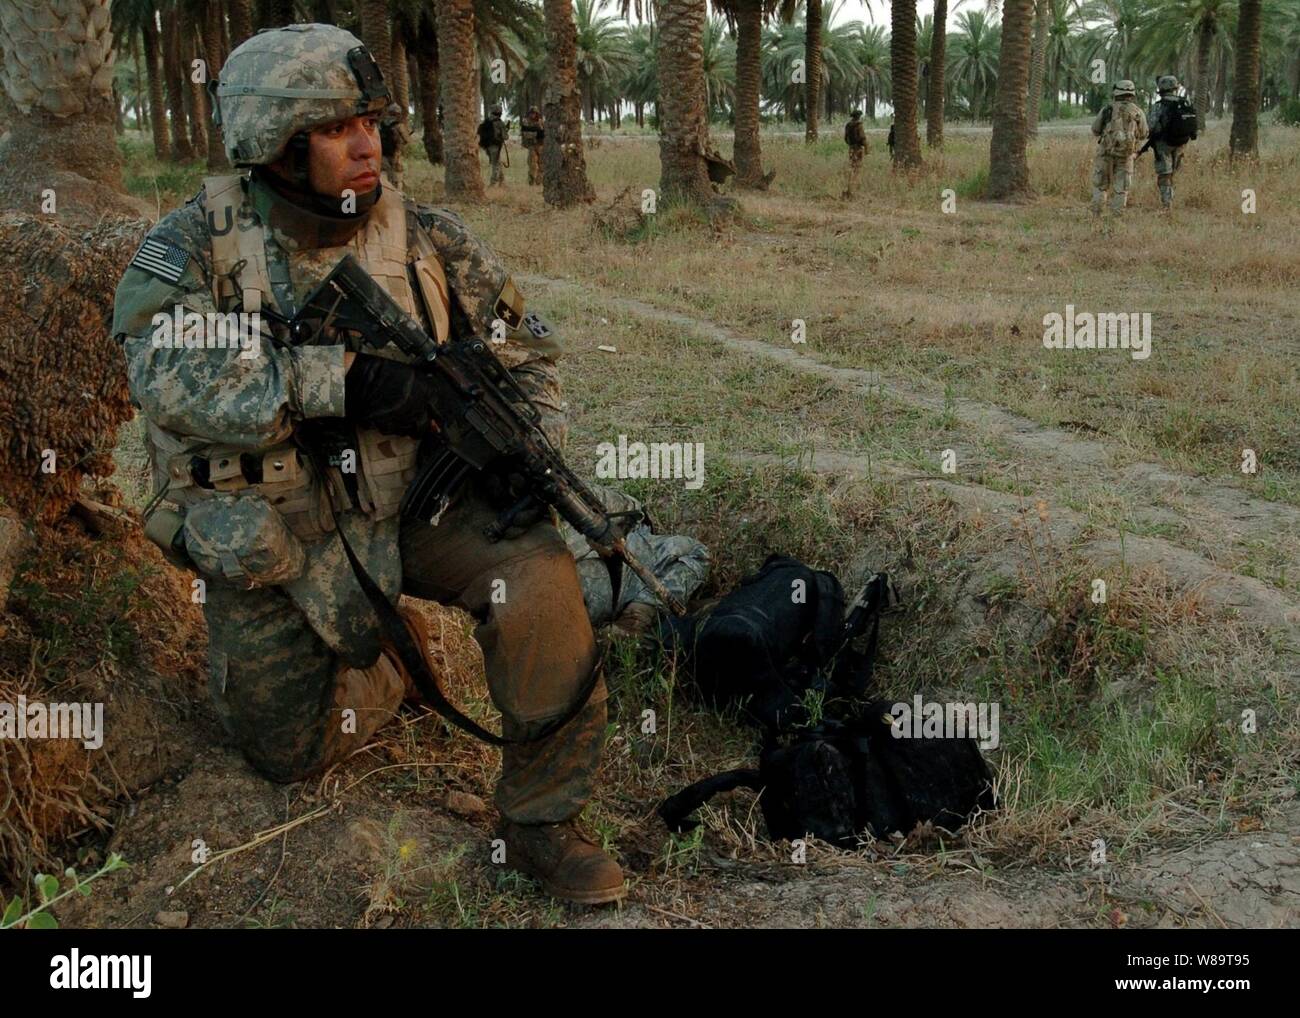 U.S. Army Staff Sgt. Danny Jimenez kneels on one knee as he provides perimeter security for his fellow soldiers during an air-assault raid on a suspected insurgent sanctuary in Mushada, Iraq, on June 23, 2006.  Jimenez is from the 1st Battalion, 66th Armor Regiment, 1st Brigade Combat Team, 4th Infantry Division. Stock Photo